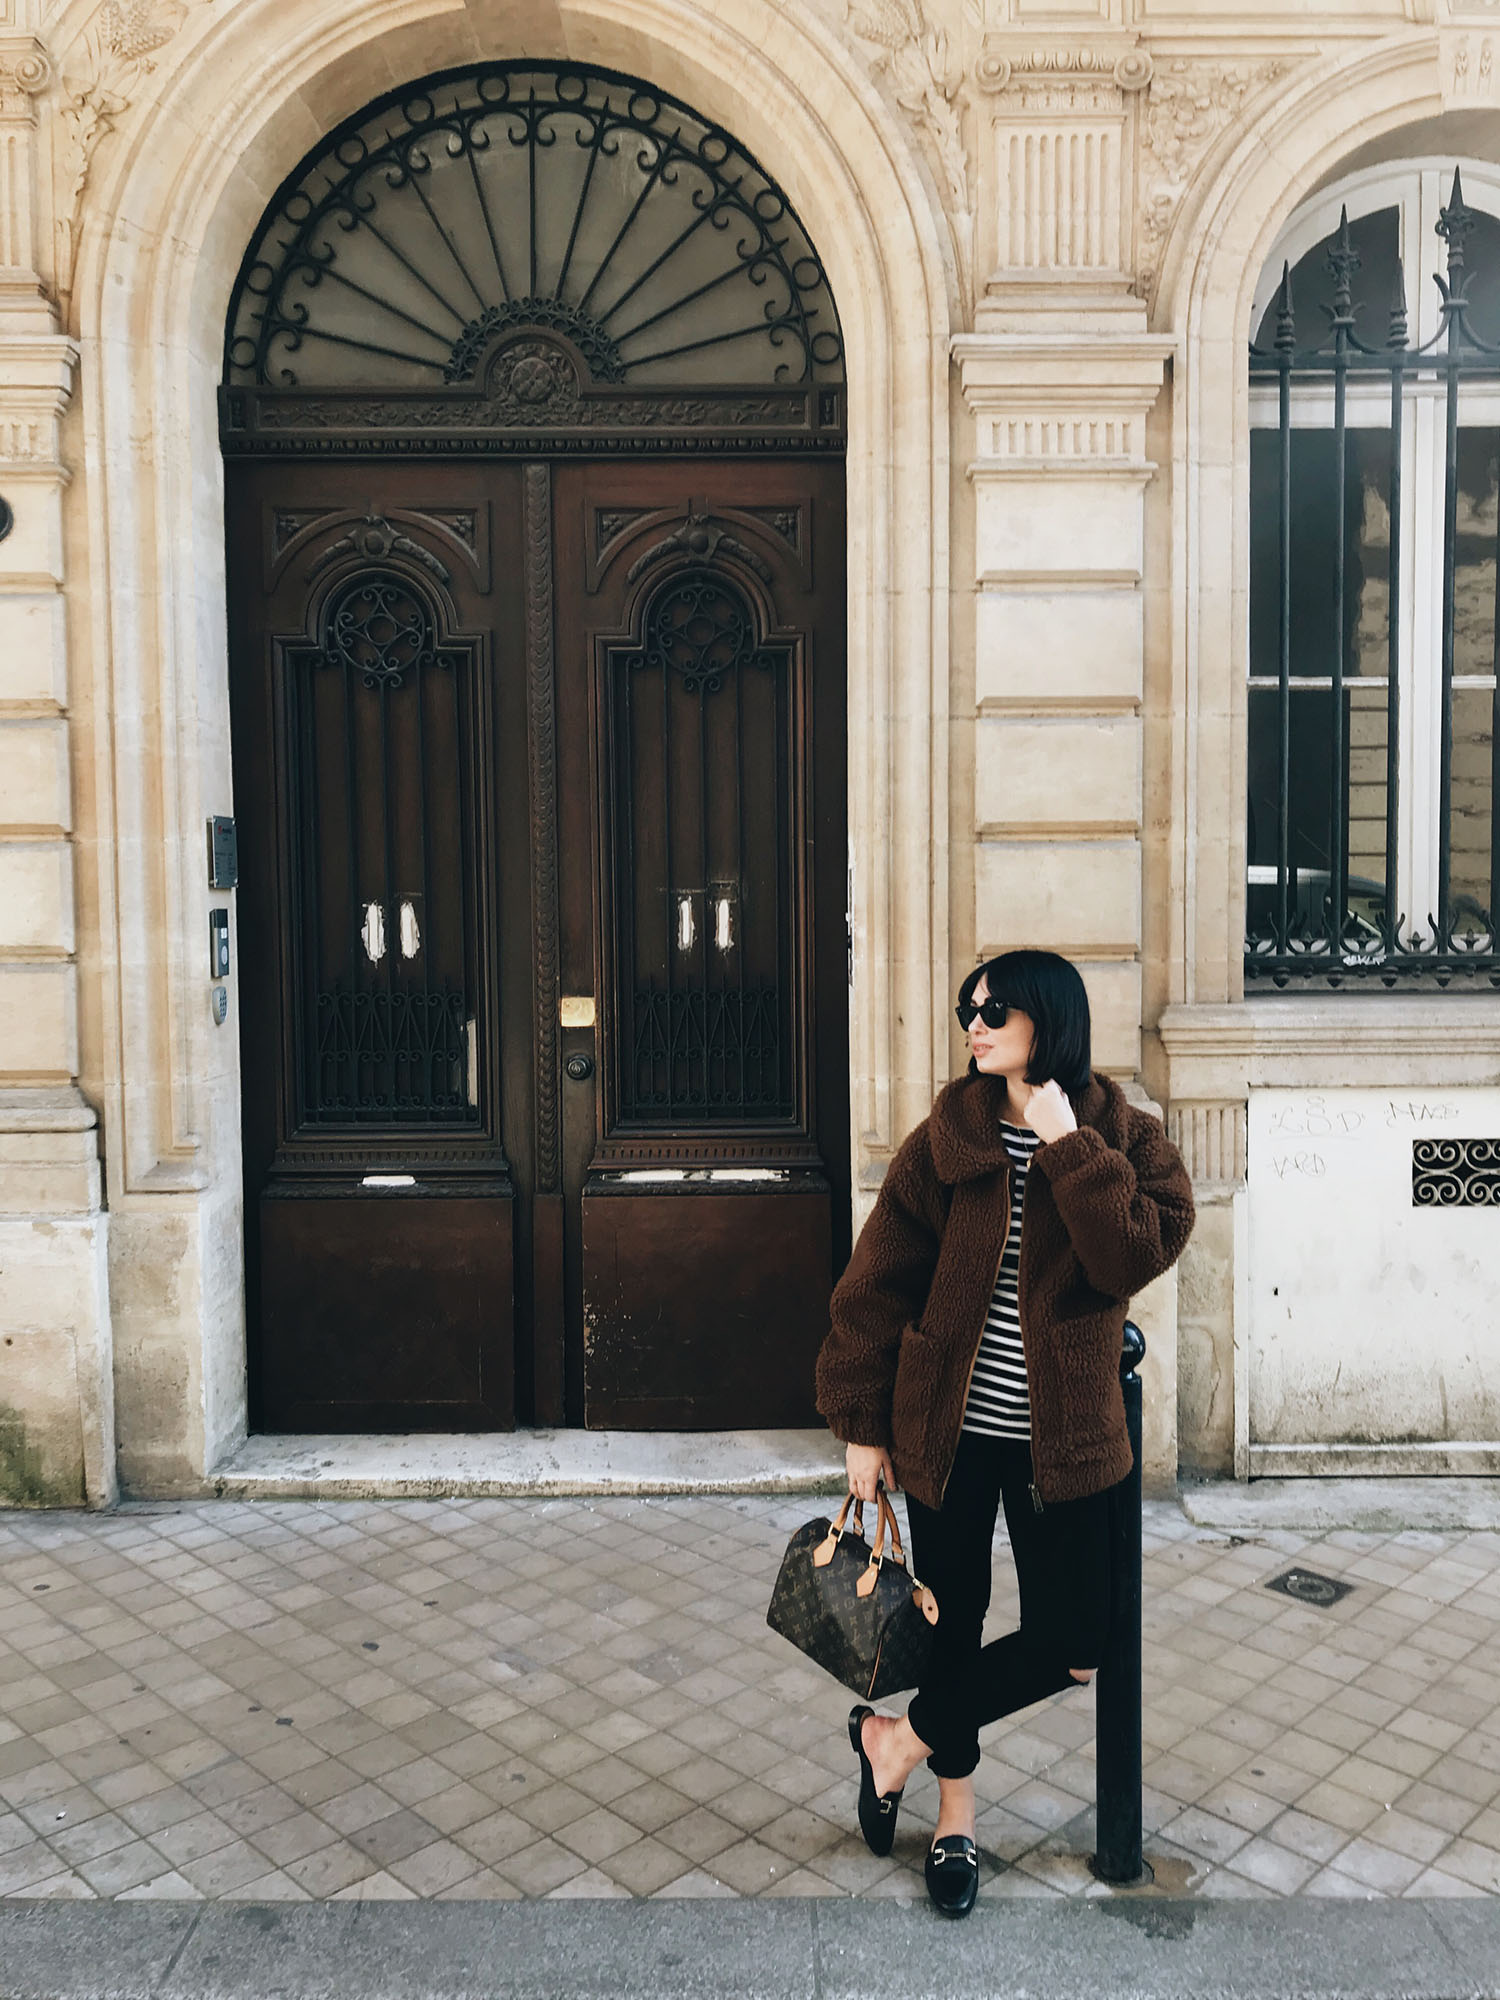 Top Winnipeg fashion blogger Cee Fardoe of Coco & Vera stands on rue des Bahutiers in Bordeaux wearing Mavi jeans and carrying a Louis Vuitton handbag